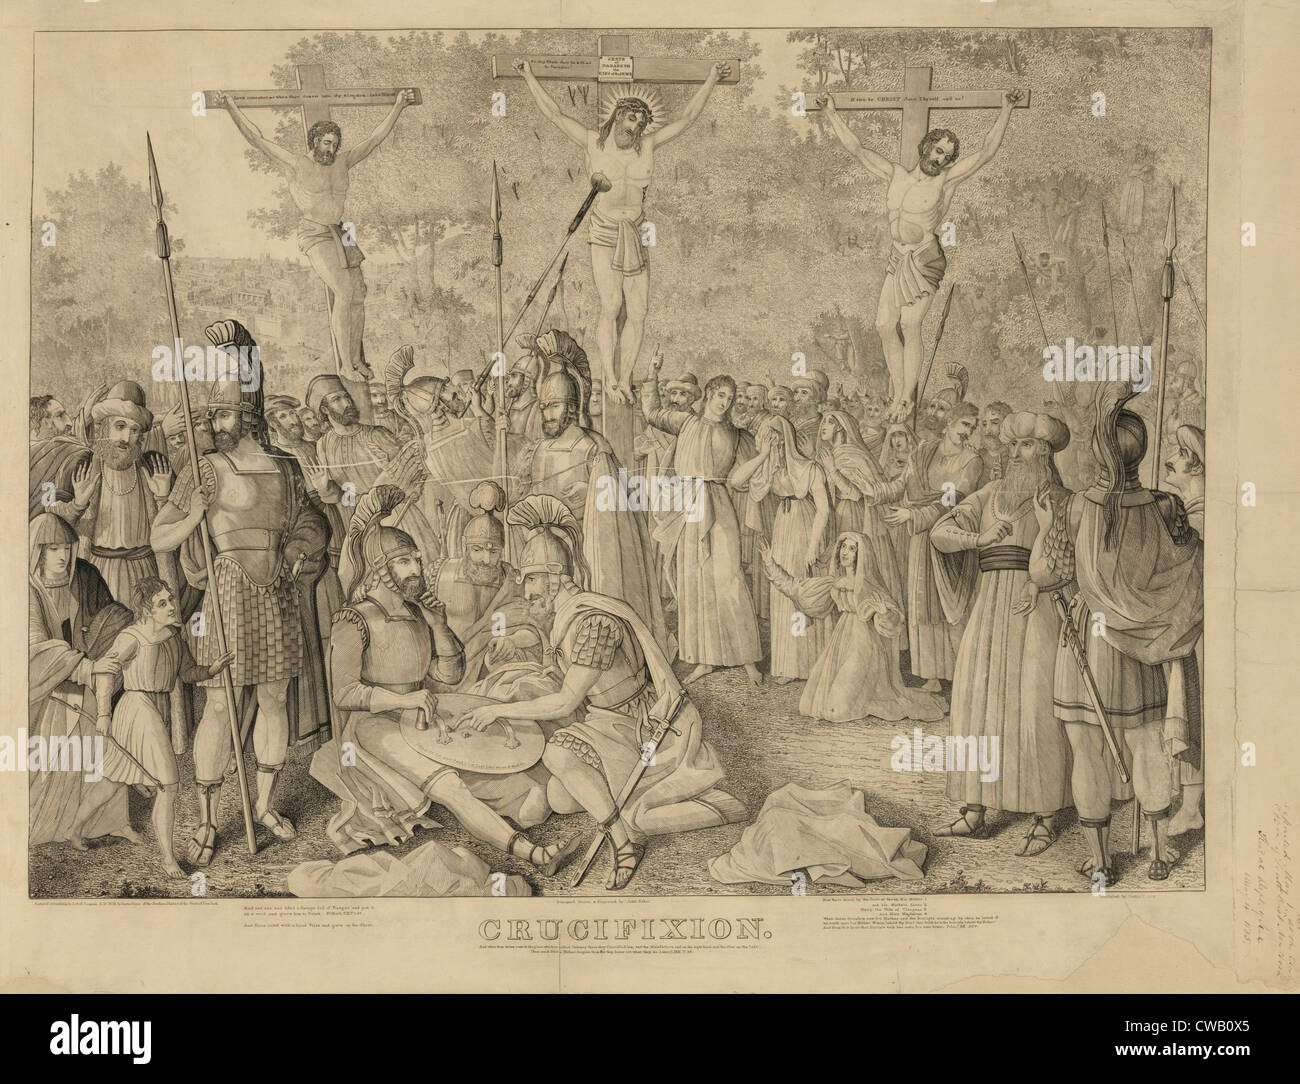 Jesus Christ, depiction of the crucifixion of Jesus Christ (top center), drawing, circa 1835. Stock Photo